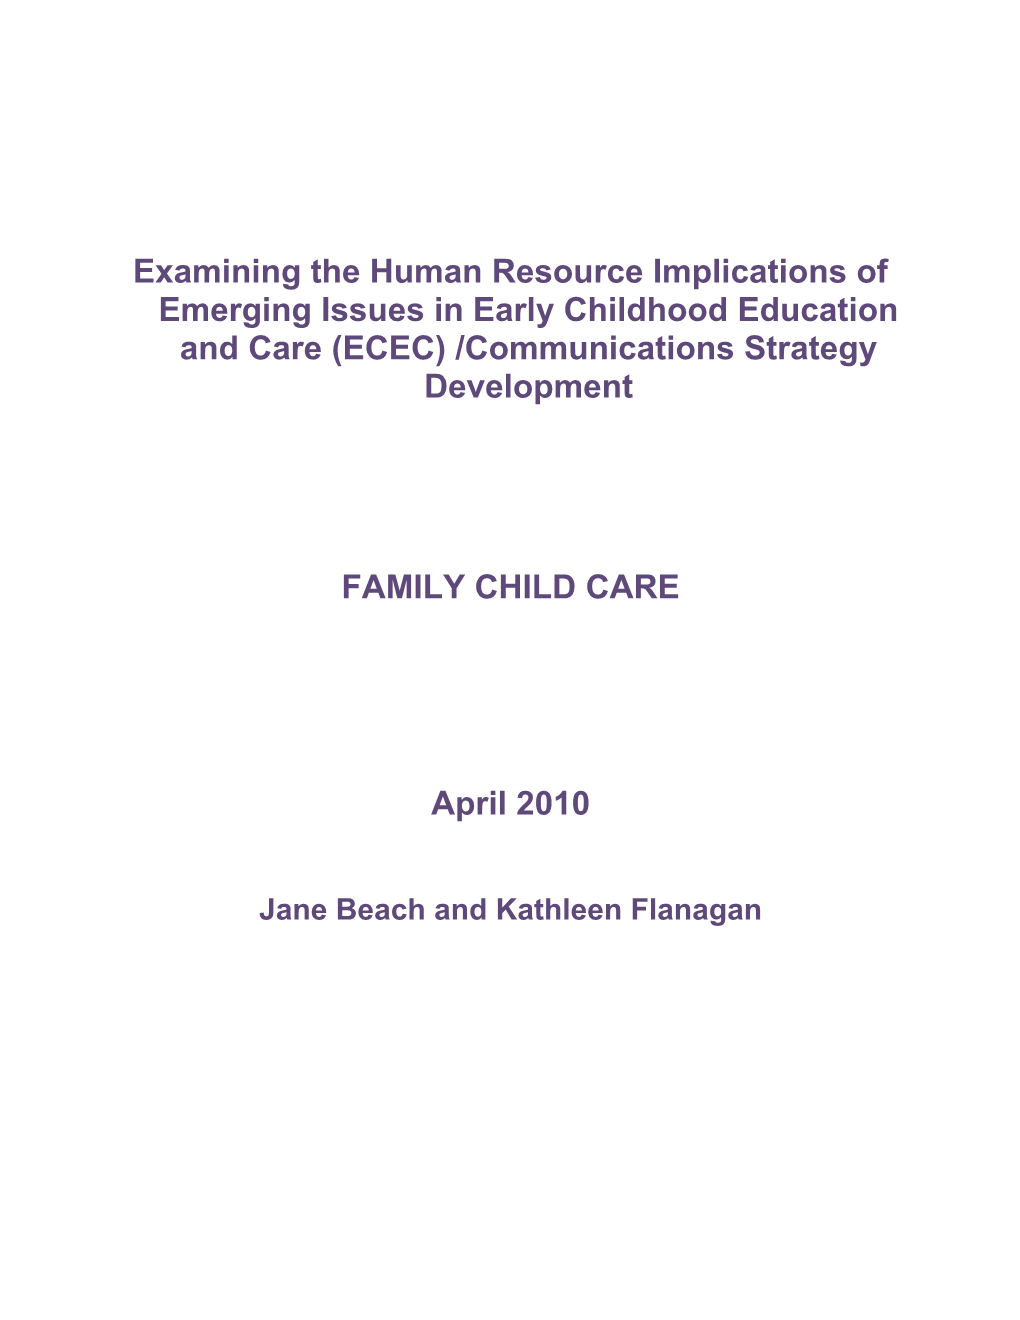 Examining the Human Resource Implications of Emerging Issues in Early Childhood Education